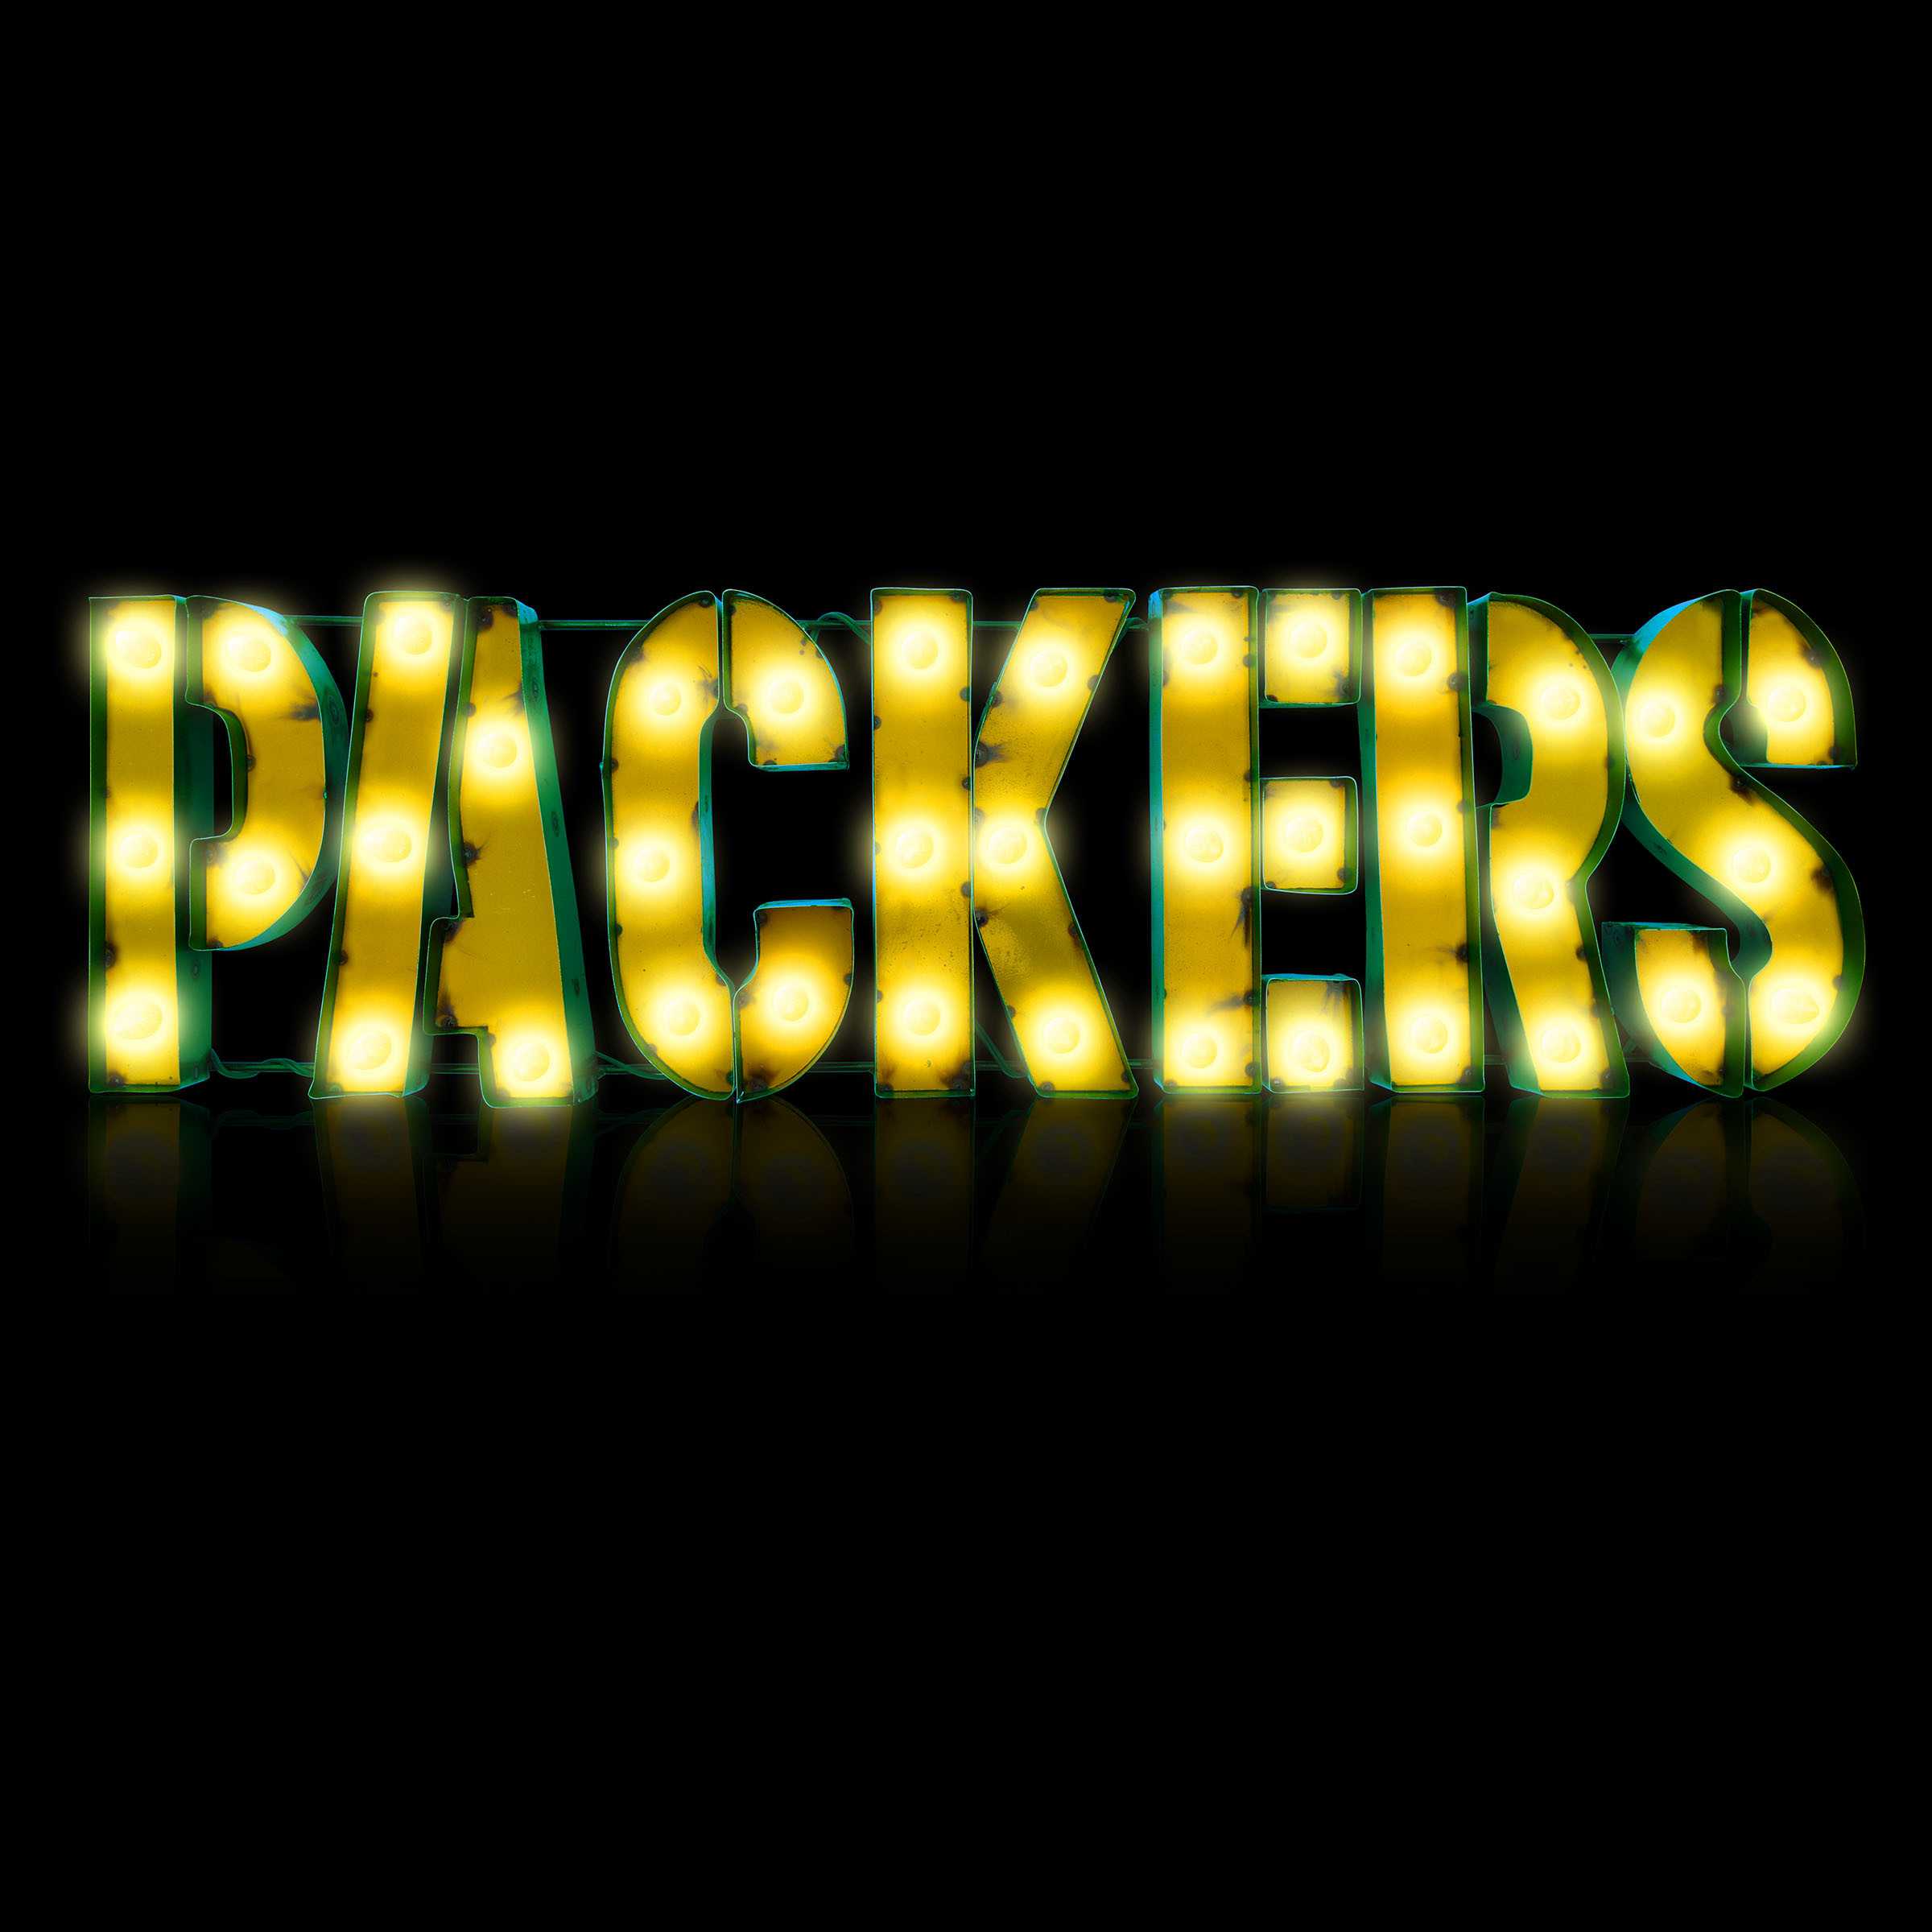 Green Bay Packers Lighted Recycled Metal Sign